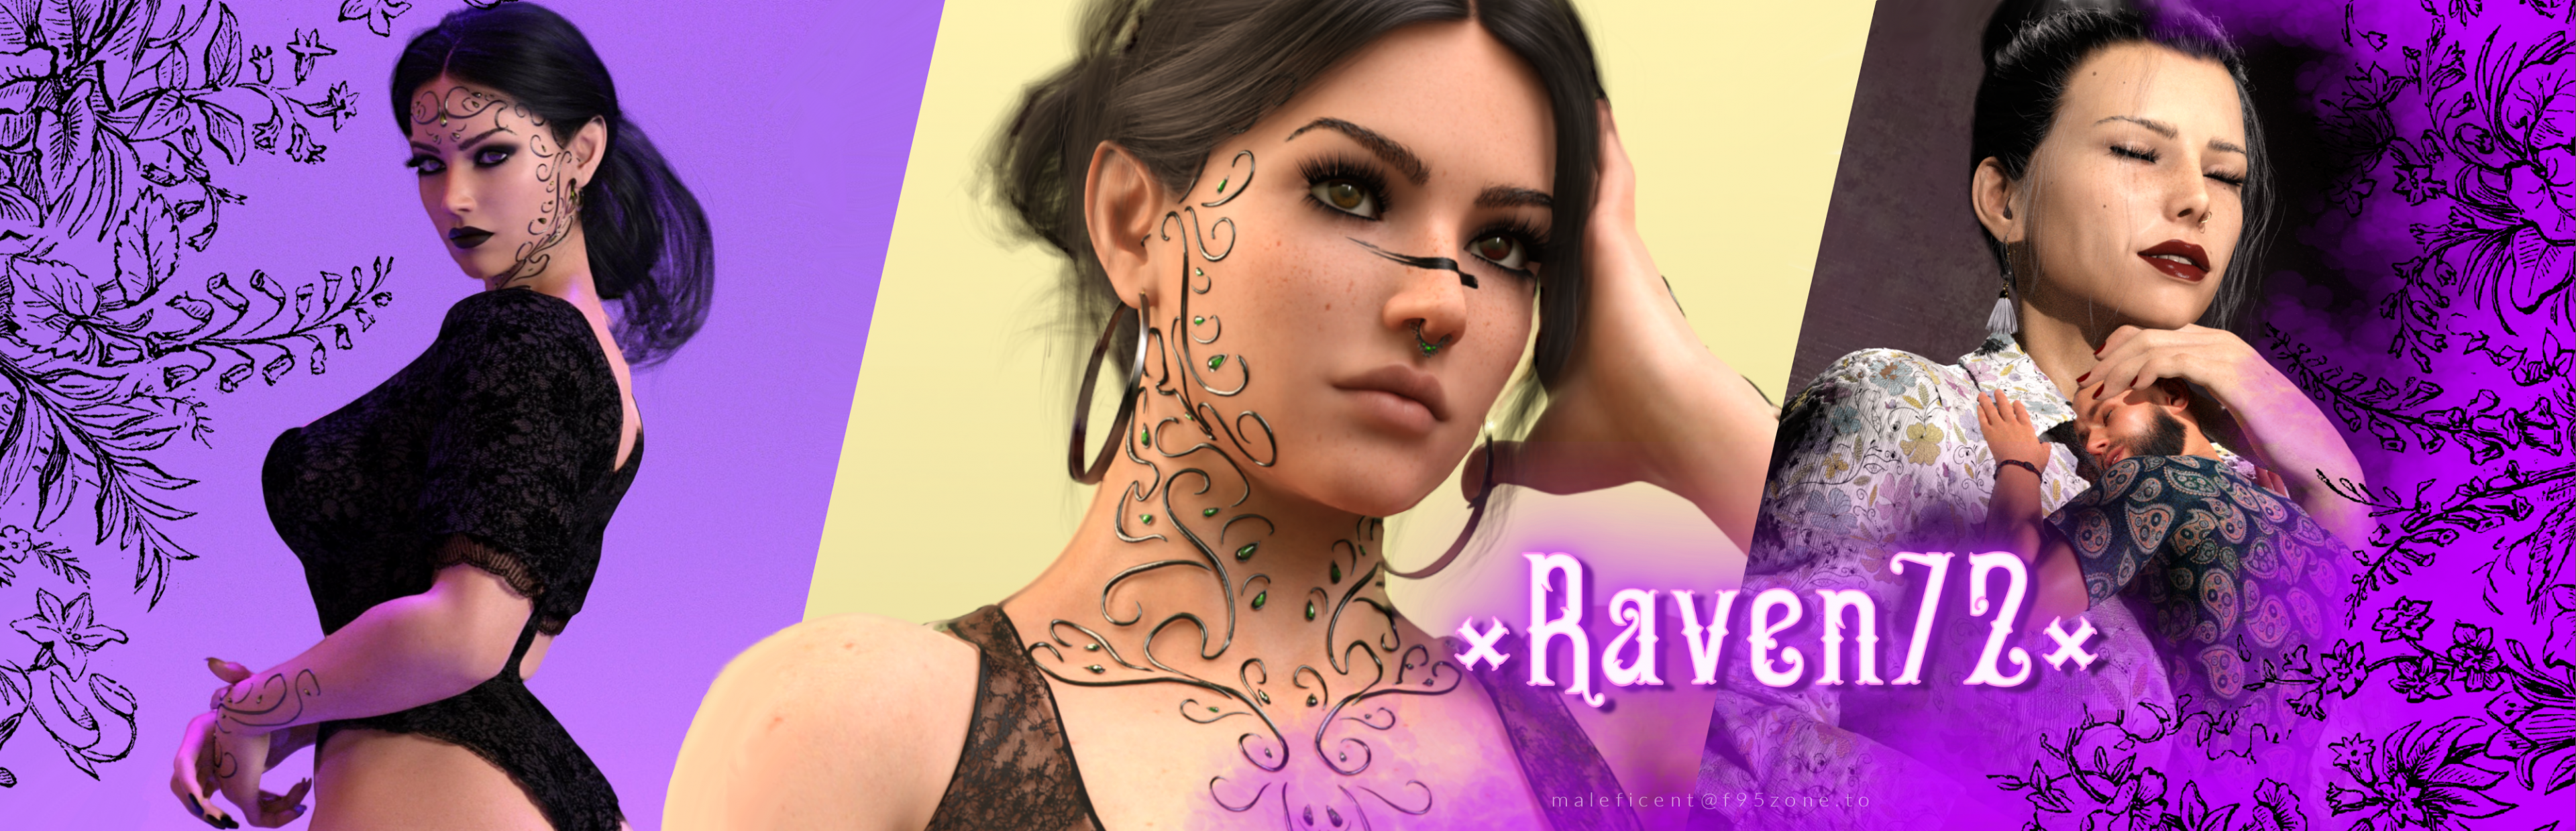 raven72_custom-cover_by_maleficent.png